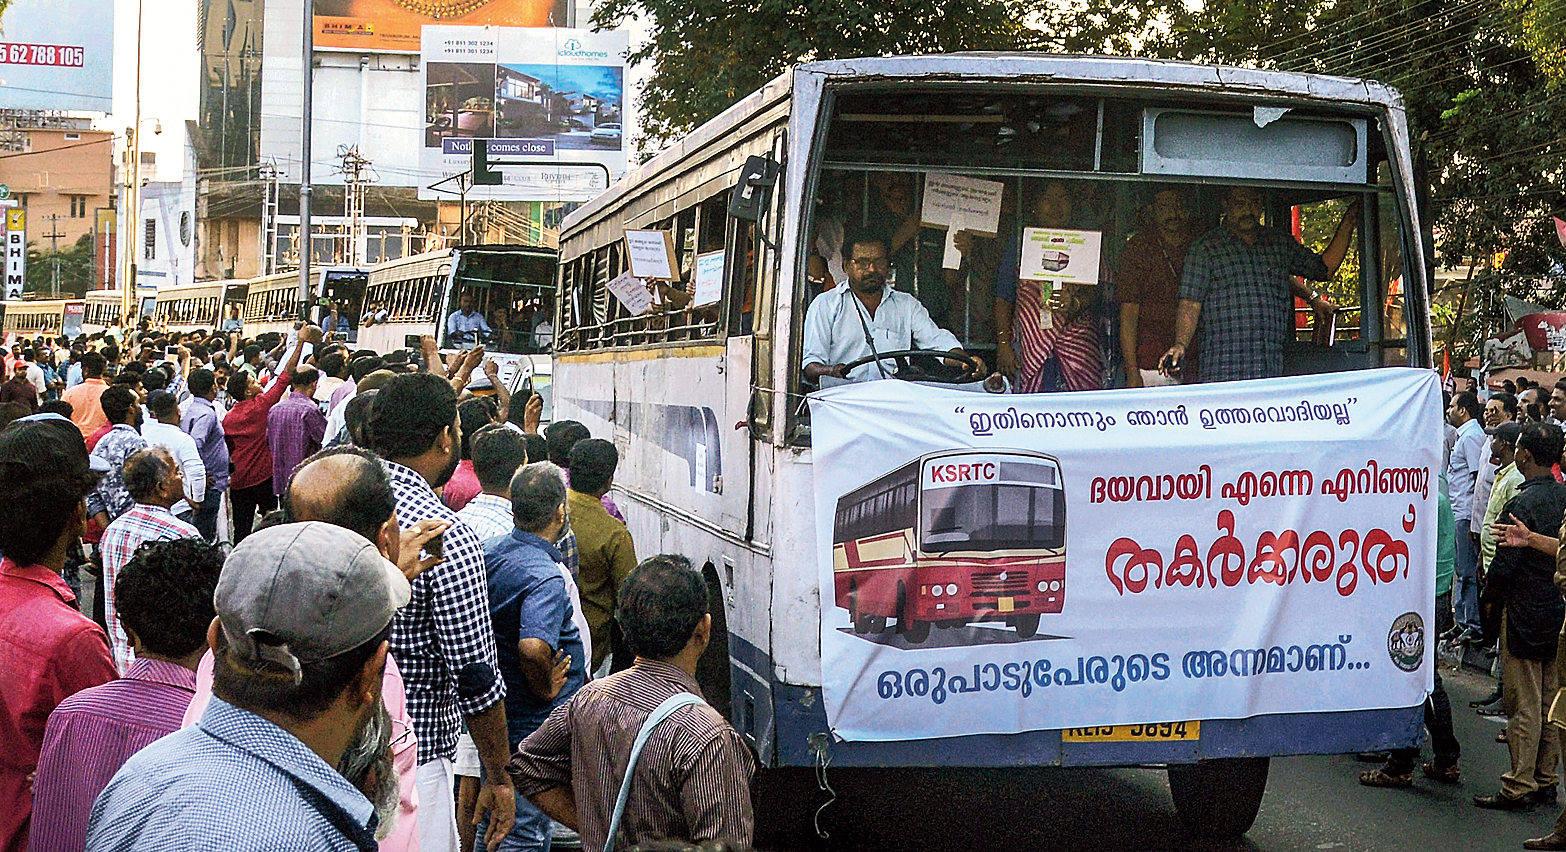 “I am not responsible for any of this. Please don’t smash me up with stones. A lot of people depend on me for their bread,” cries the banner wrapped around a state-run bus in Thiruvananthapuram on Thursday after several such buses were damaged during the shutdown.